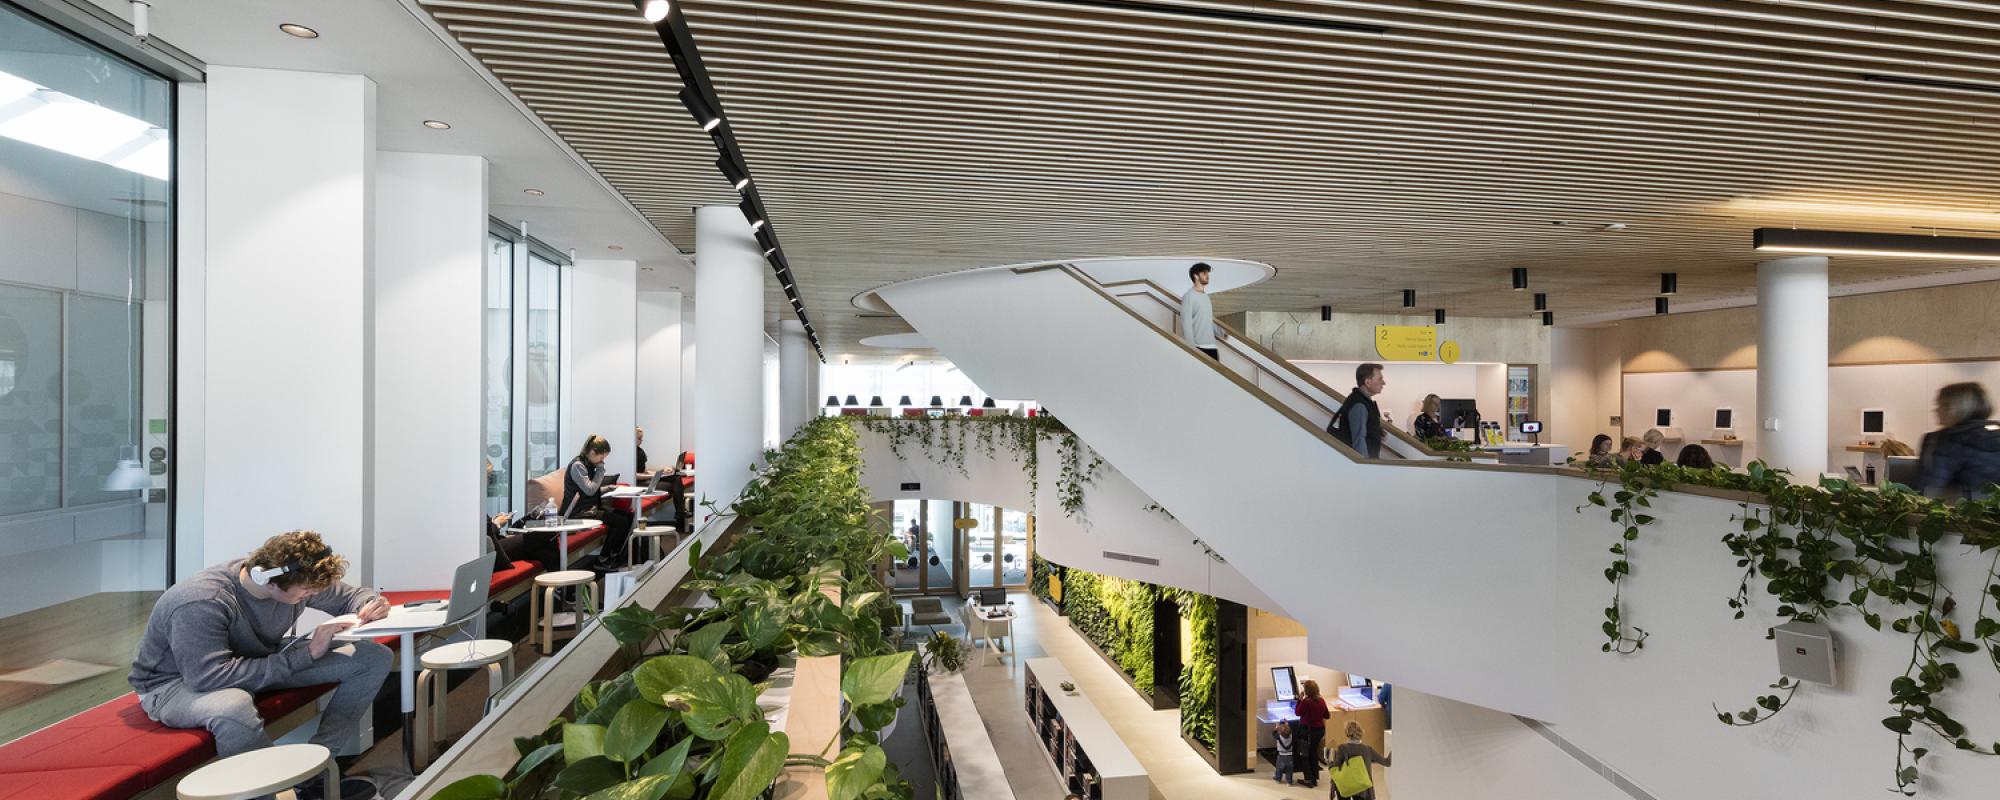 Internal view of building with plants and stairs